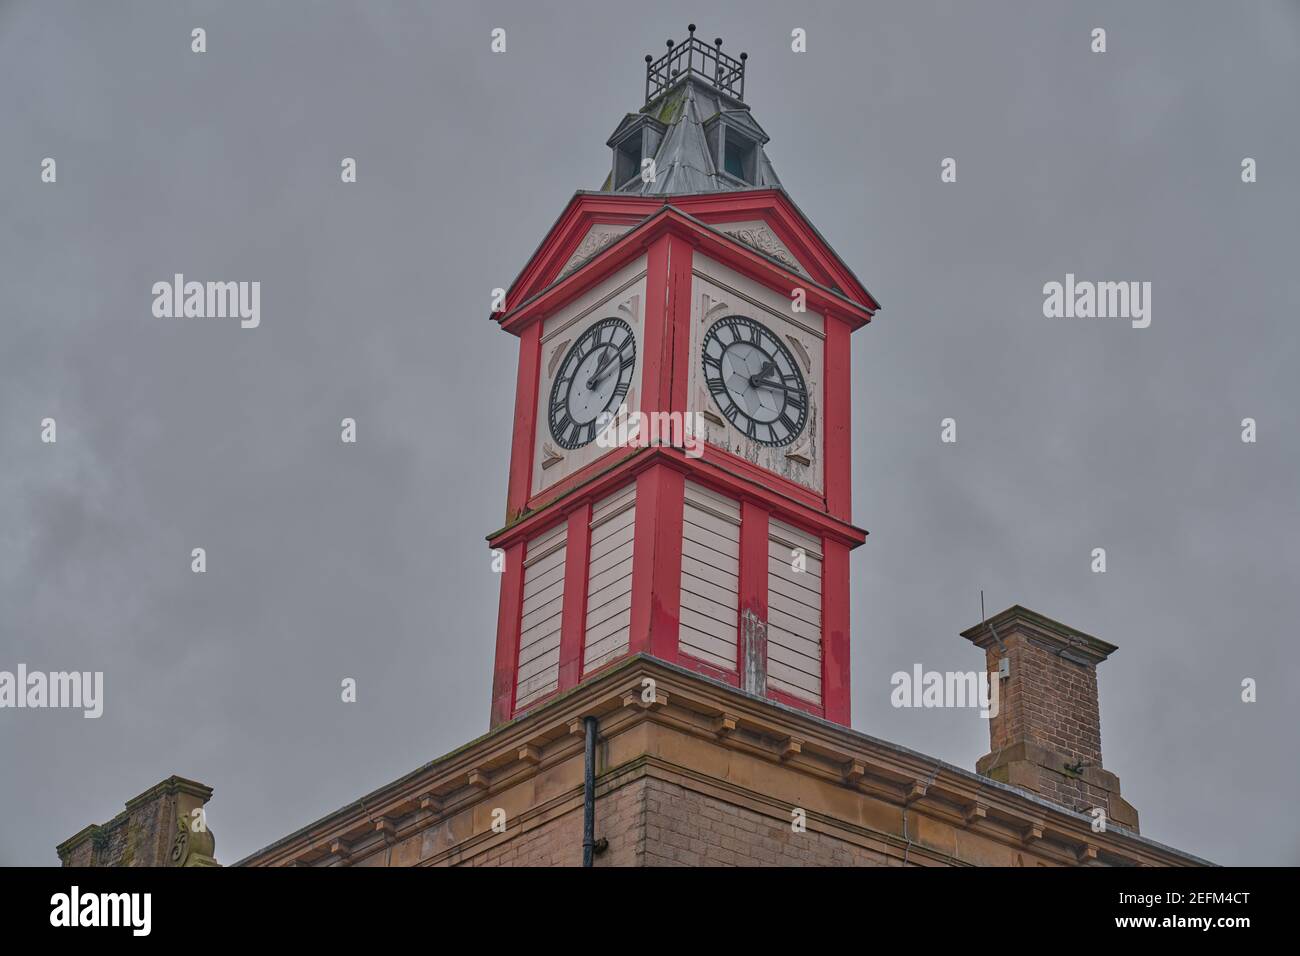 Clock tower in Northern England UK constructed from wood Stock Photo